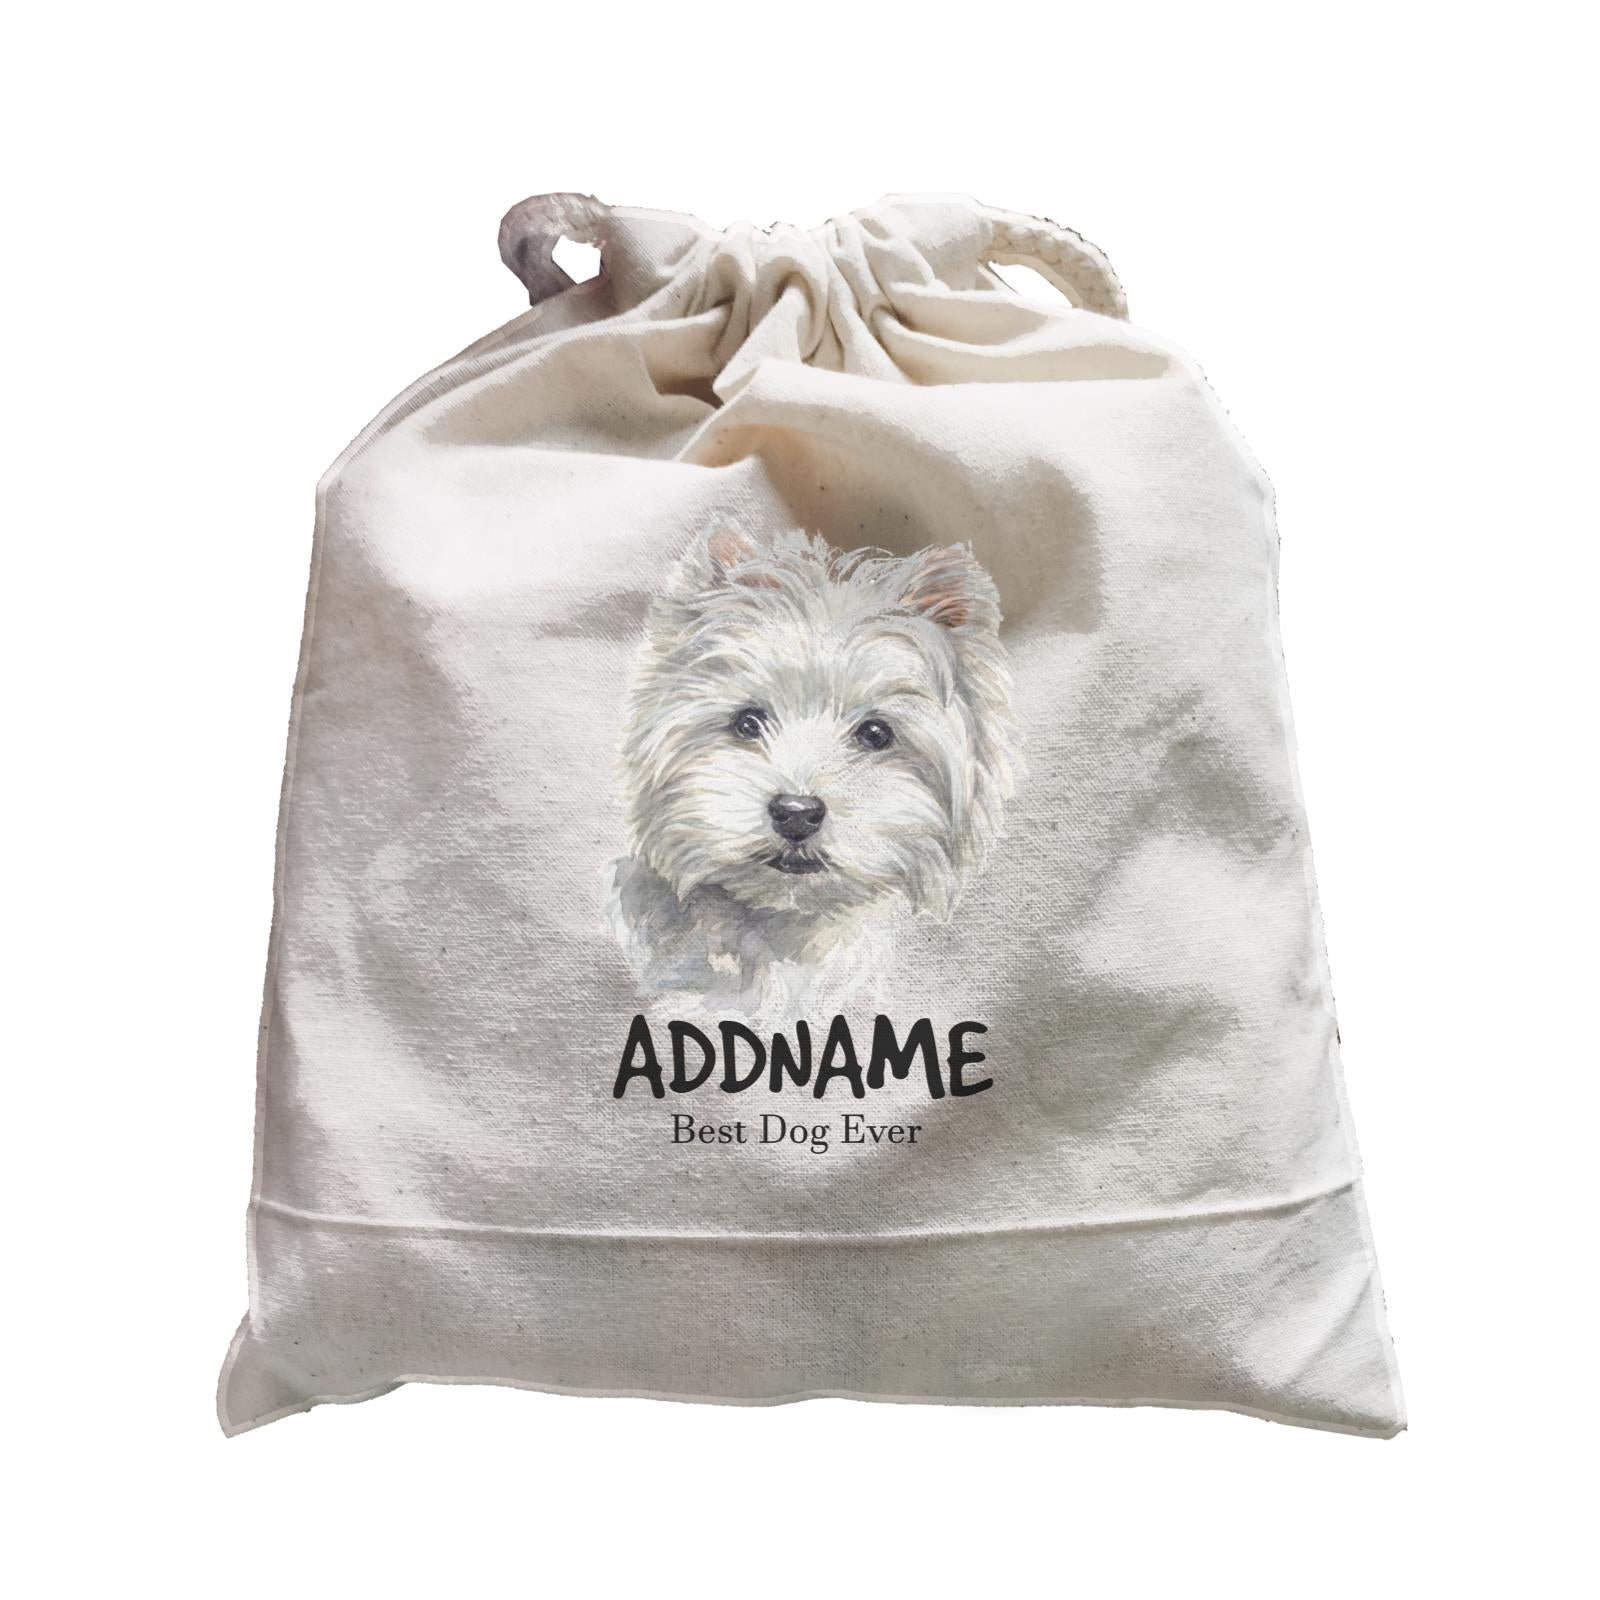 Watercolor Dog West Highland White Terrier Small Best Dog Ever Addname Satchel